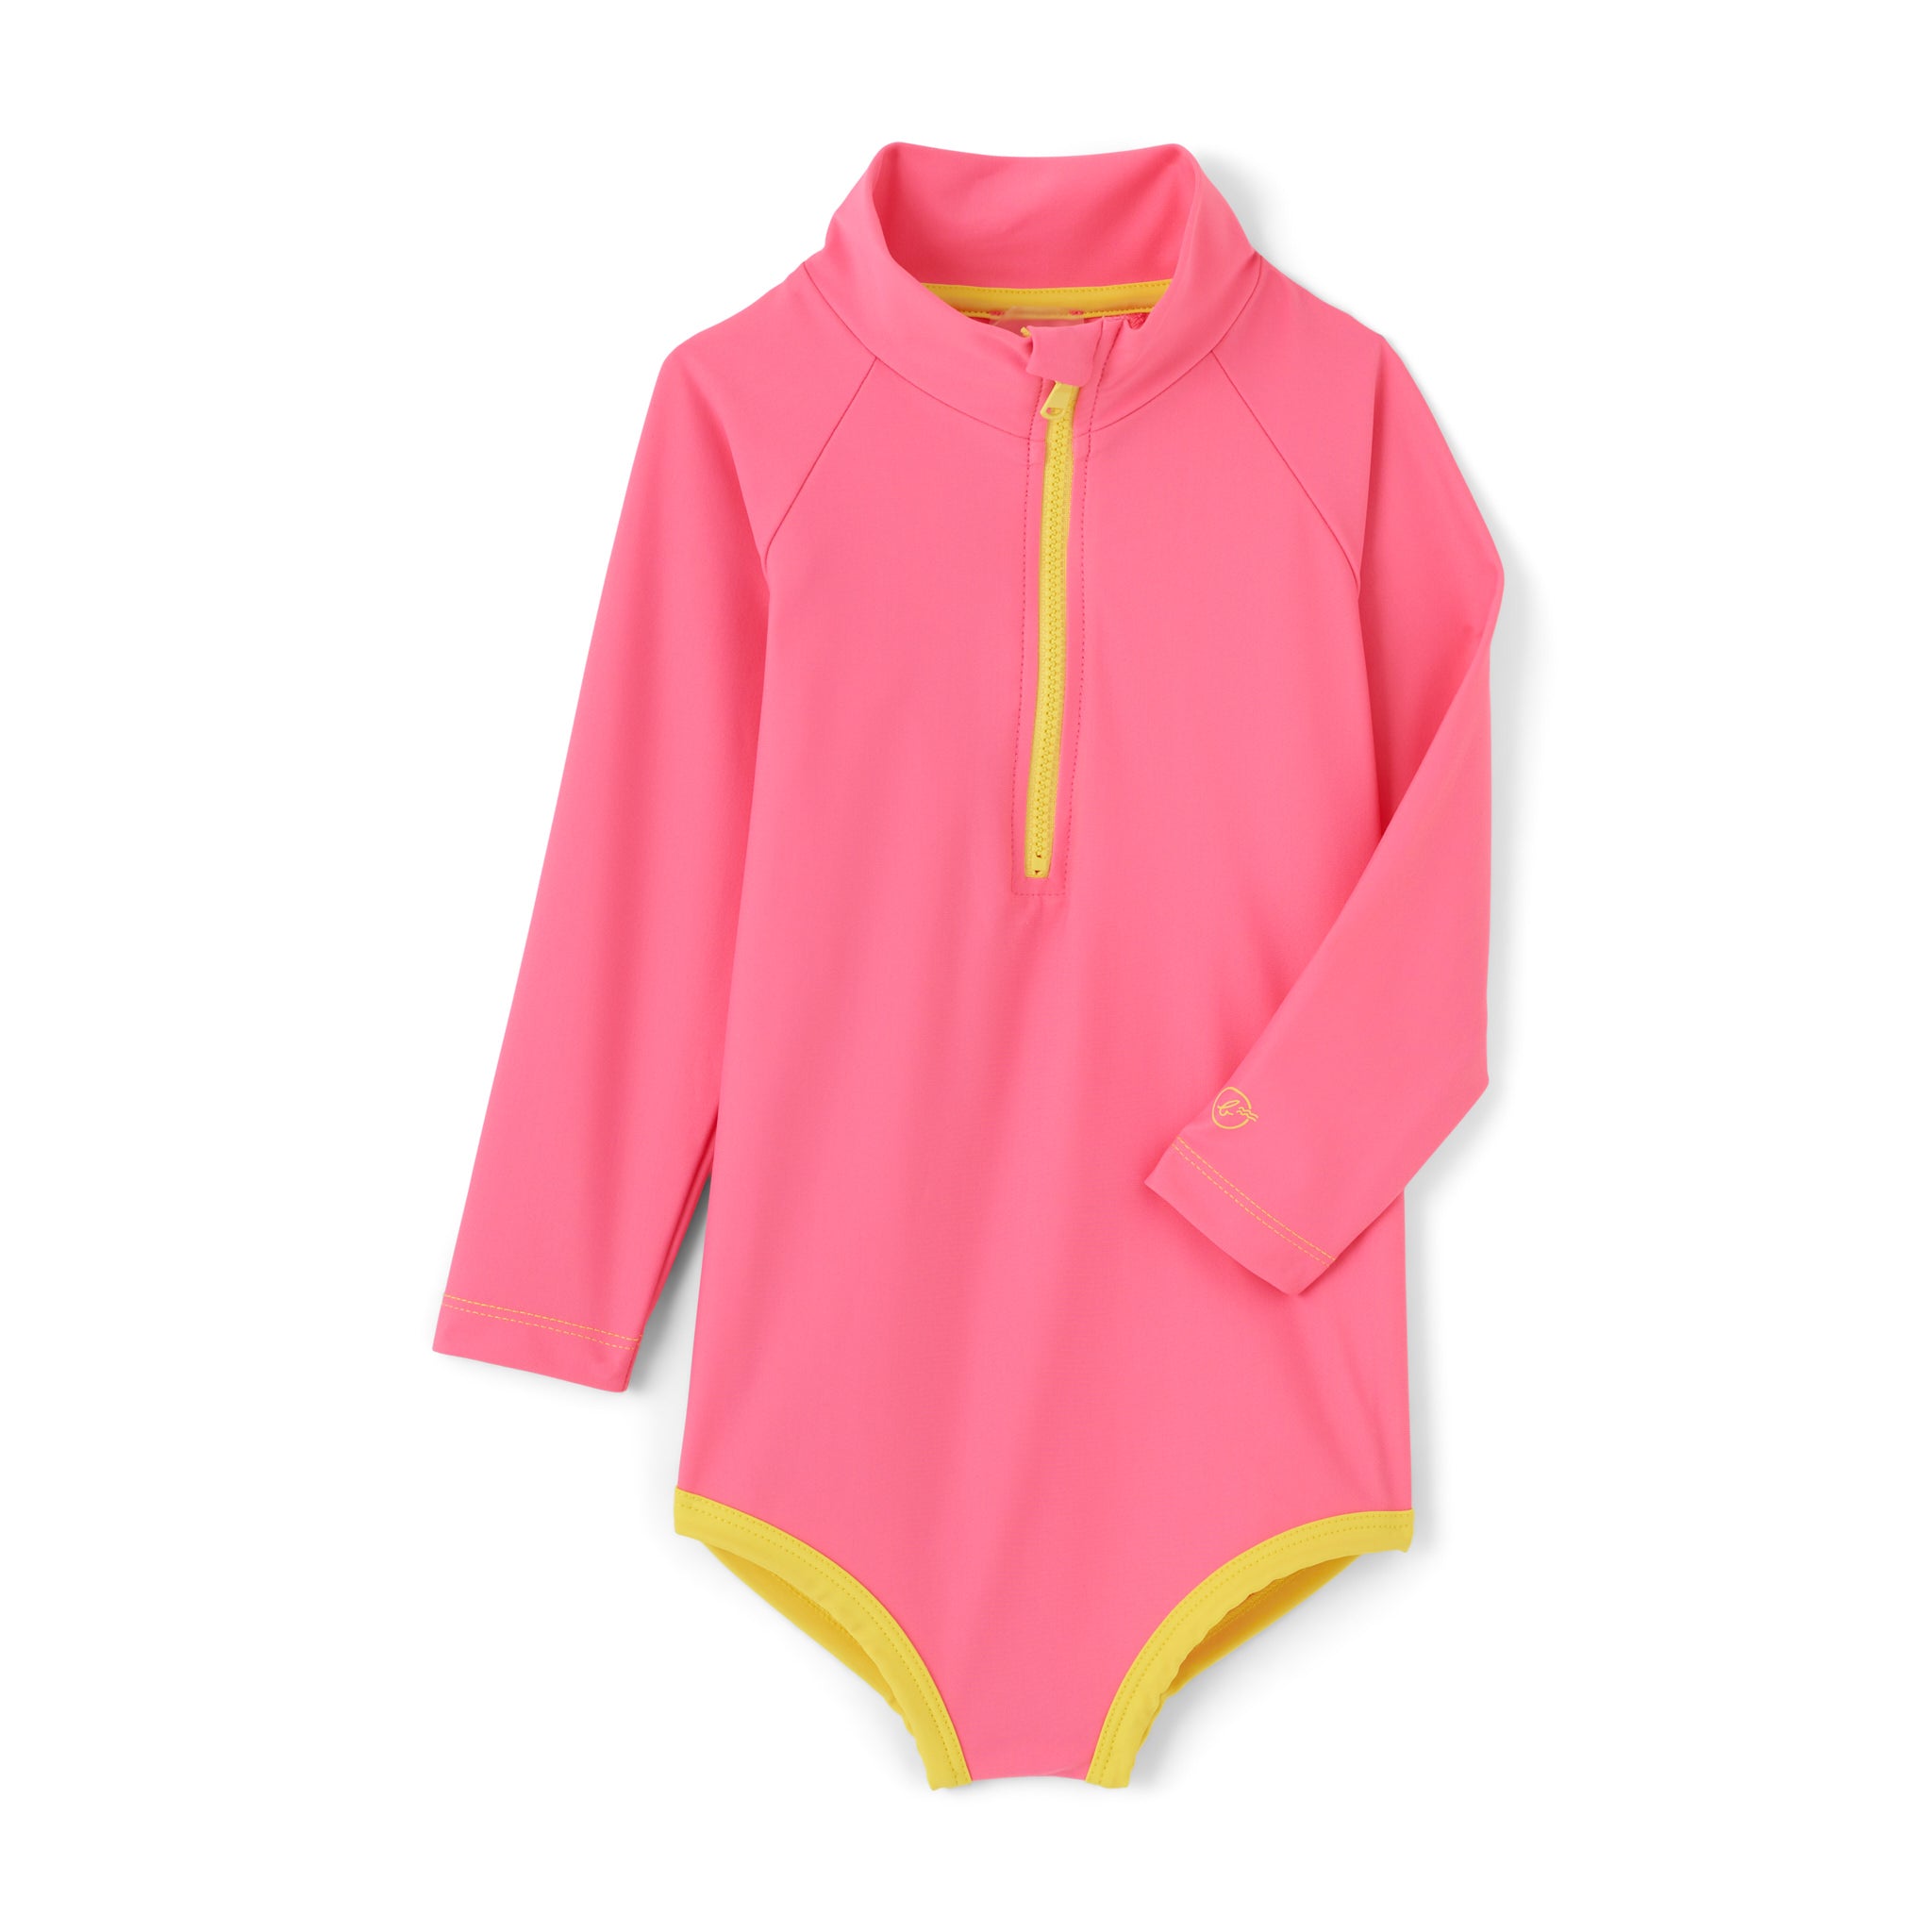 BAINES - Maillot une pièce anti-uv Passion rose (Neuf) - 5 ans